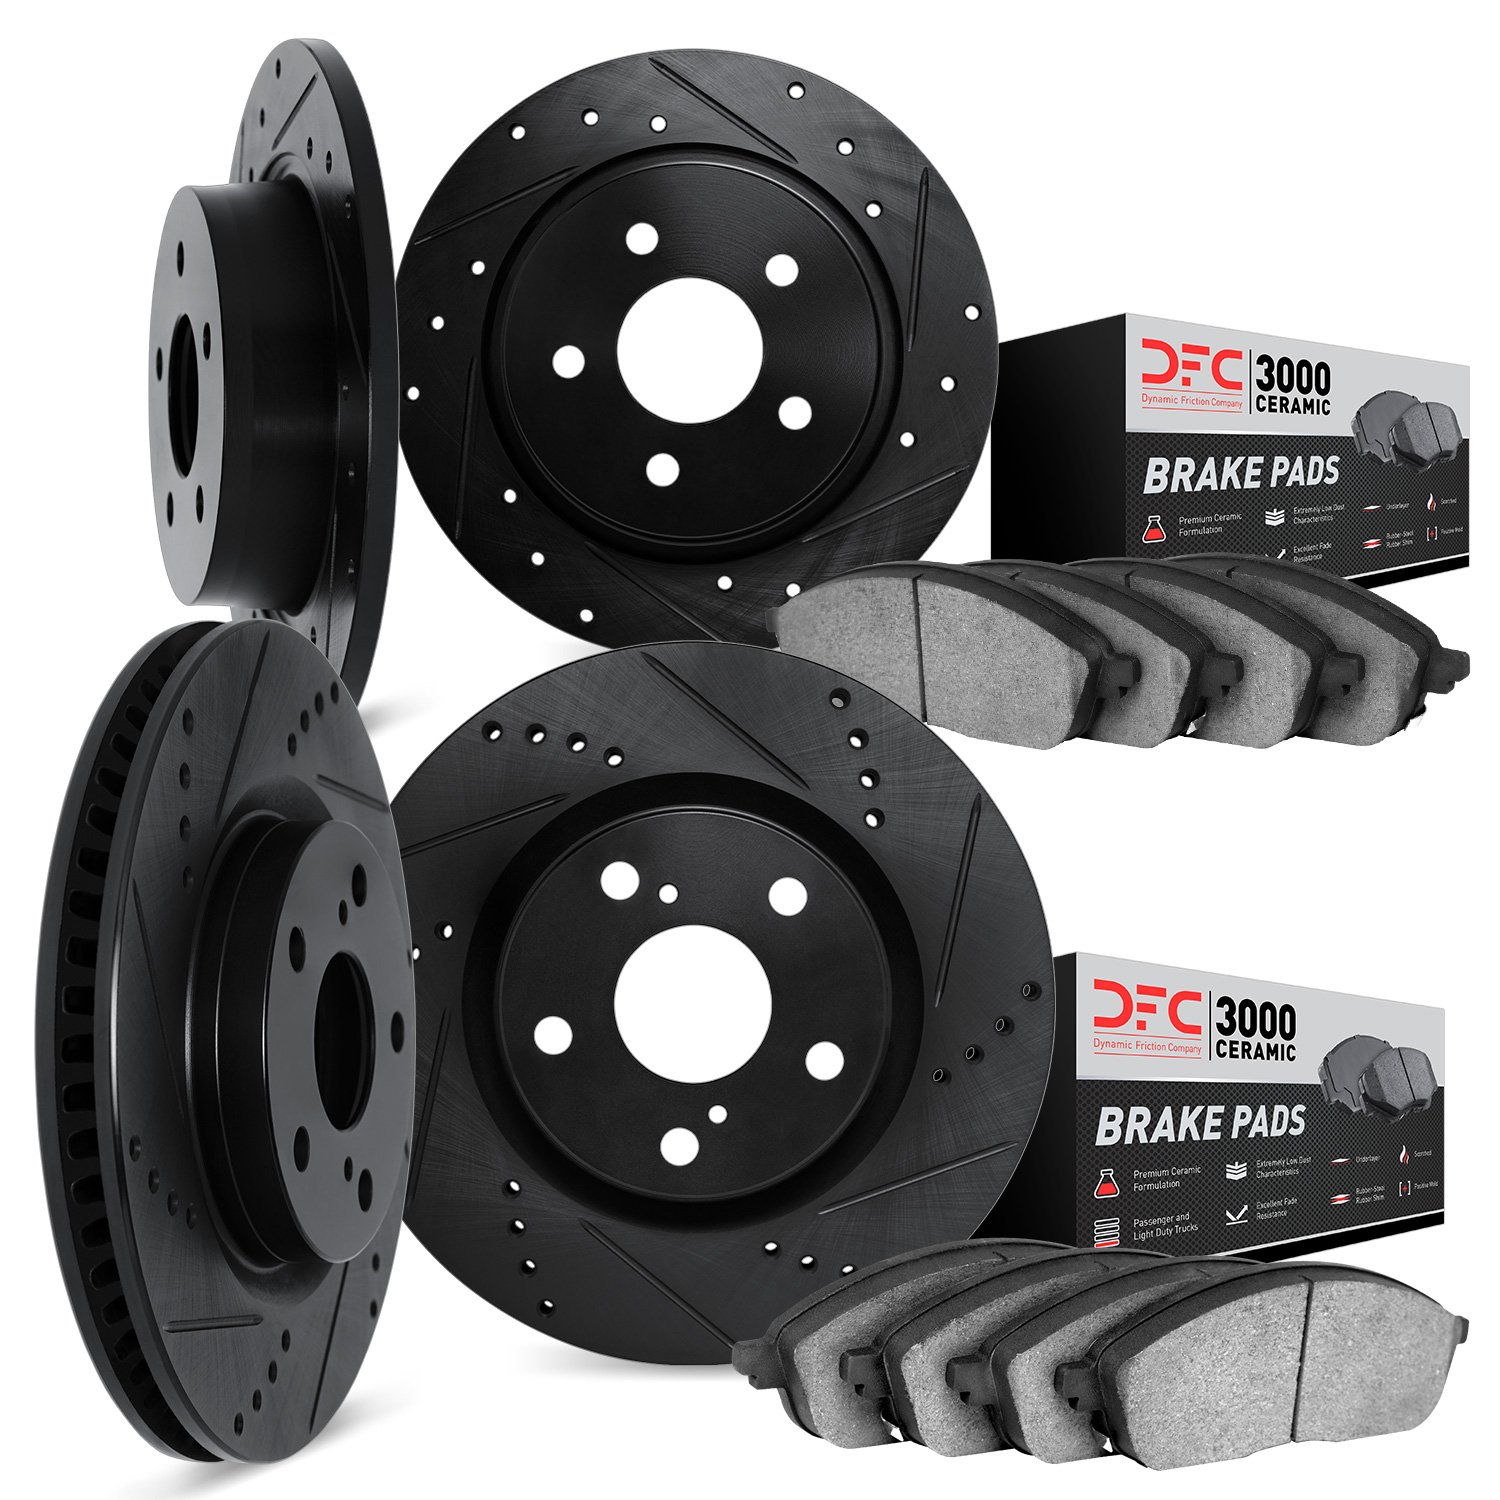 8304-59046 Drilled/Slotted Brake Rotors with 3000-Series Ceramic Brake Pads Kit [Black], 2003-2008 Acura/Honda, Position: Front